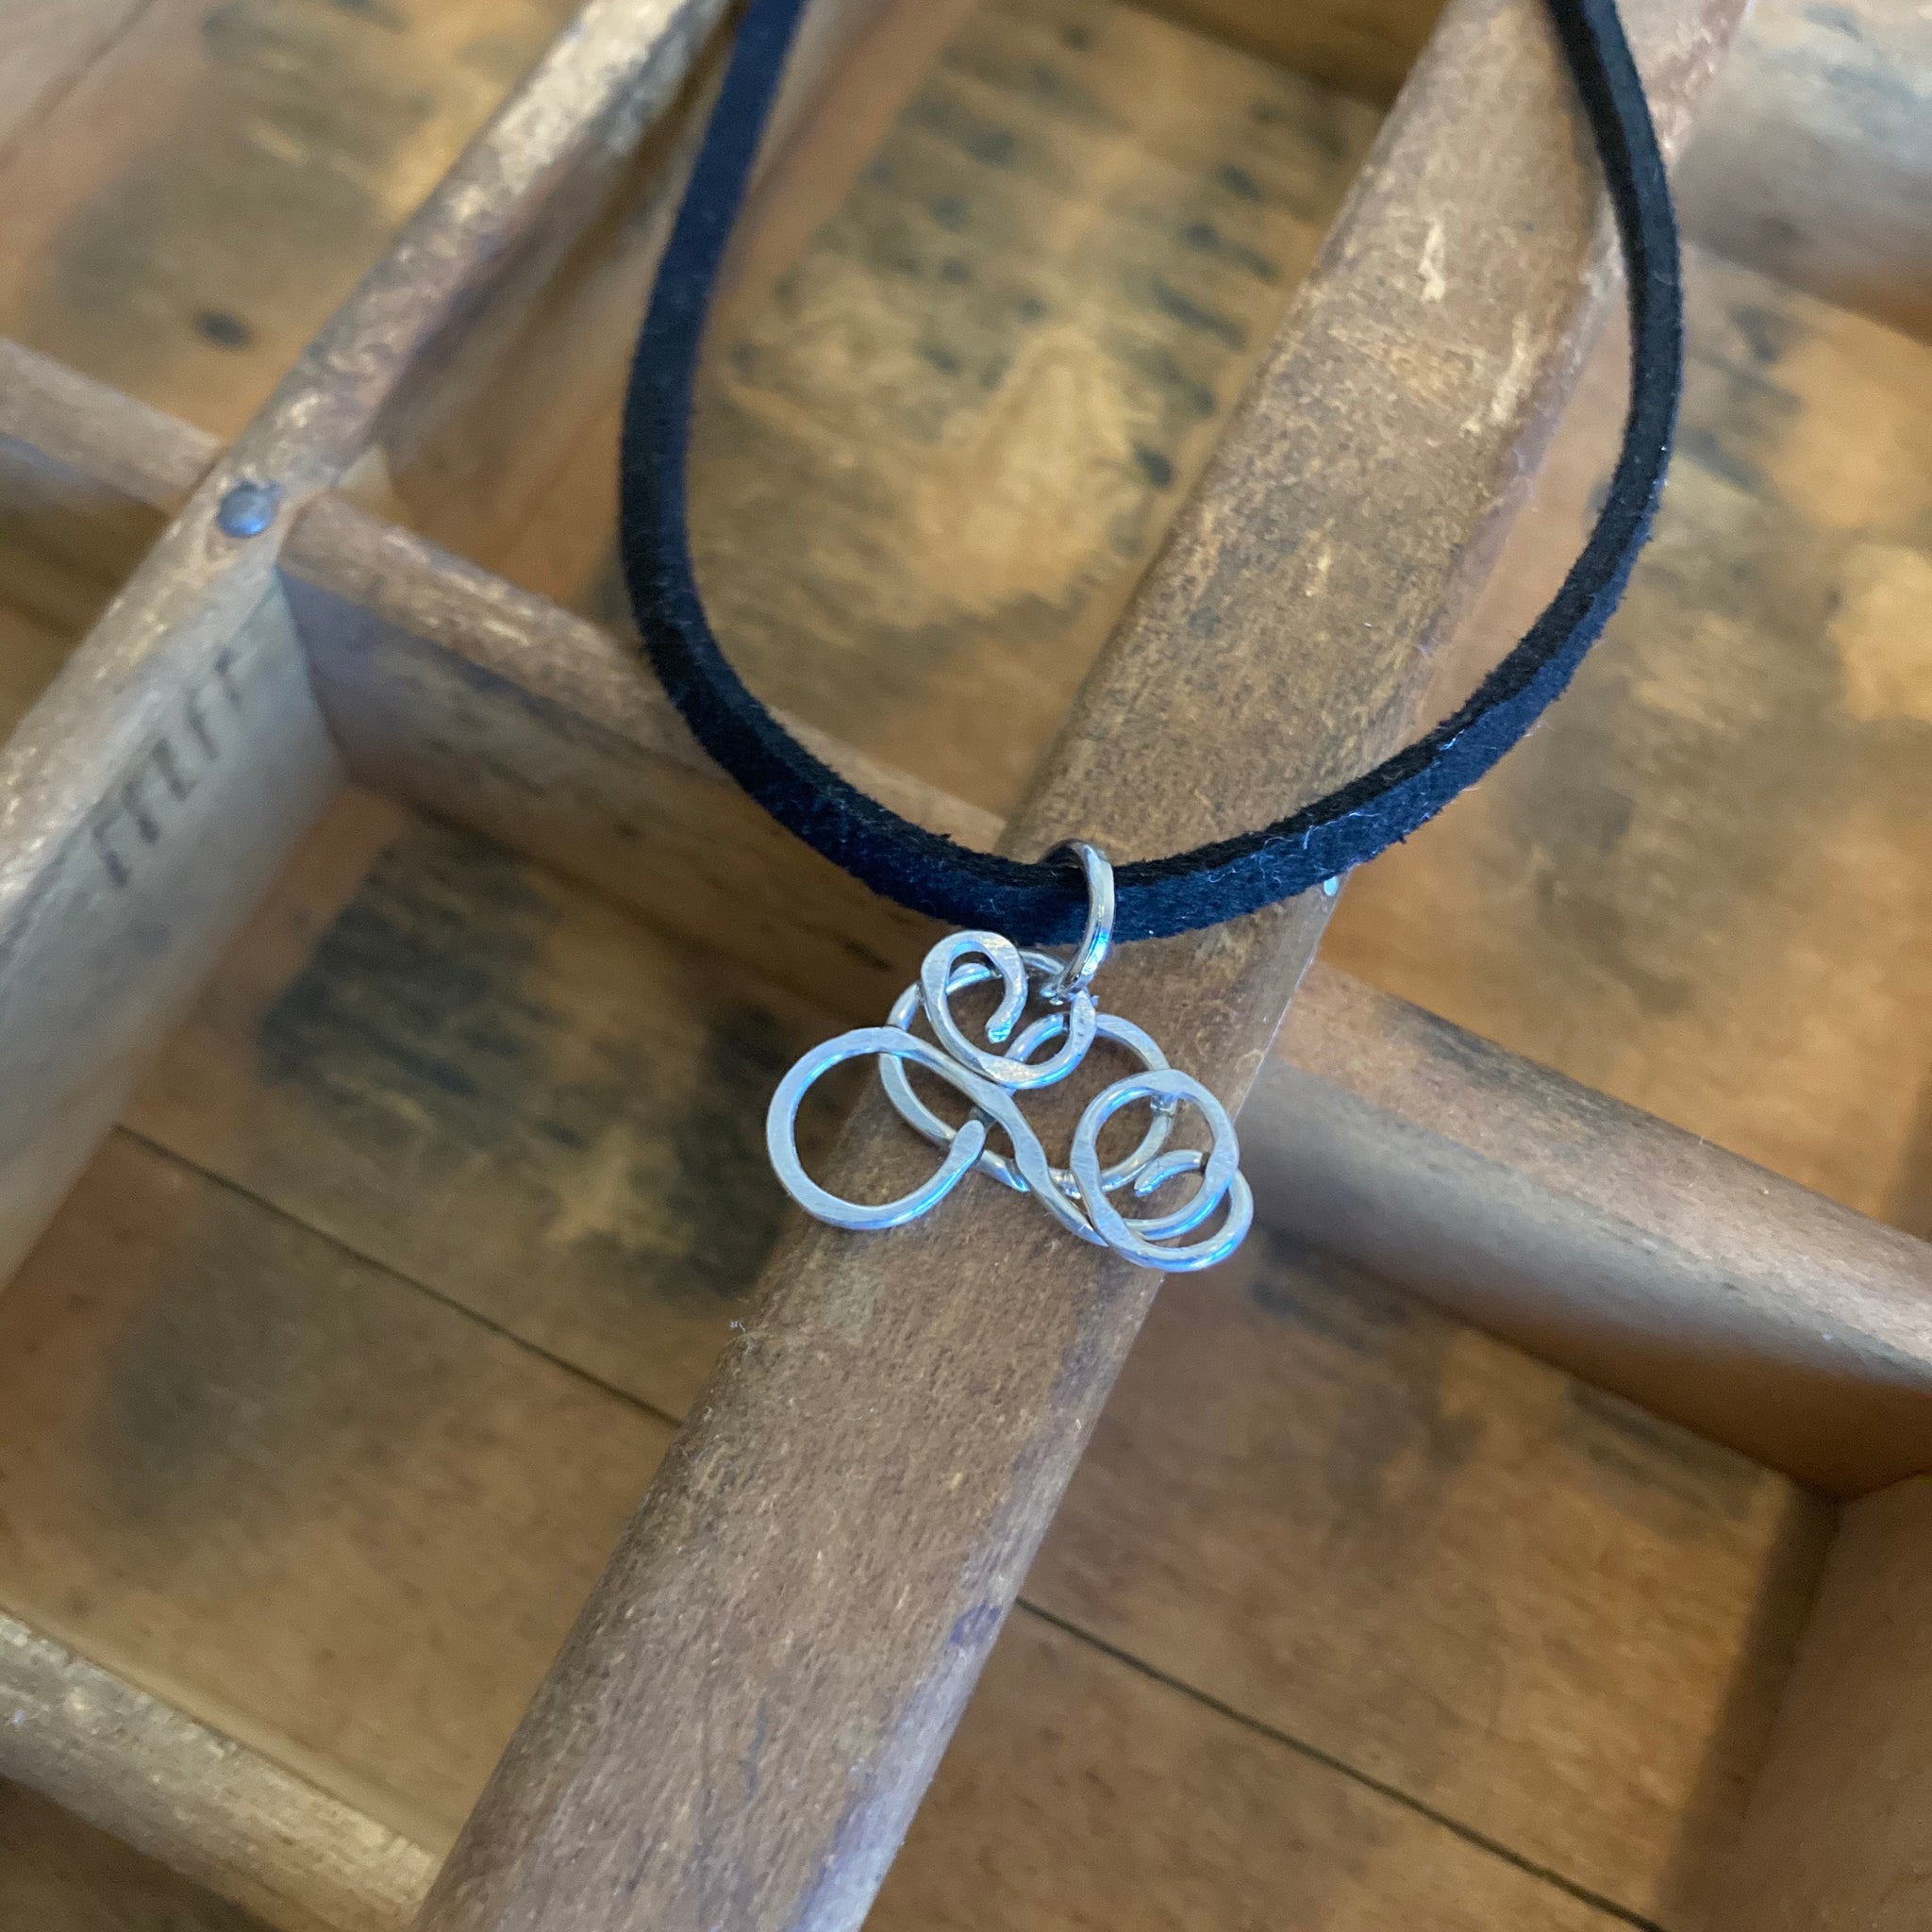 Necklace - To Infinity and Beyond - Sterling Silver/Suede Cord